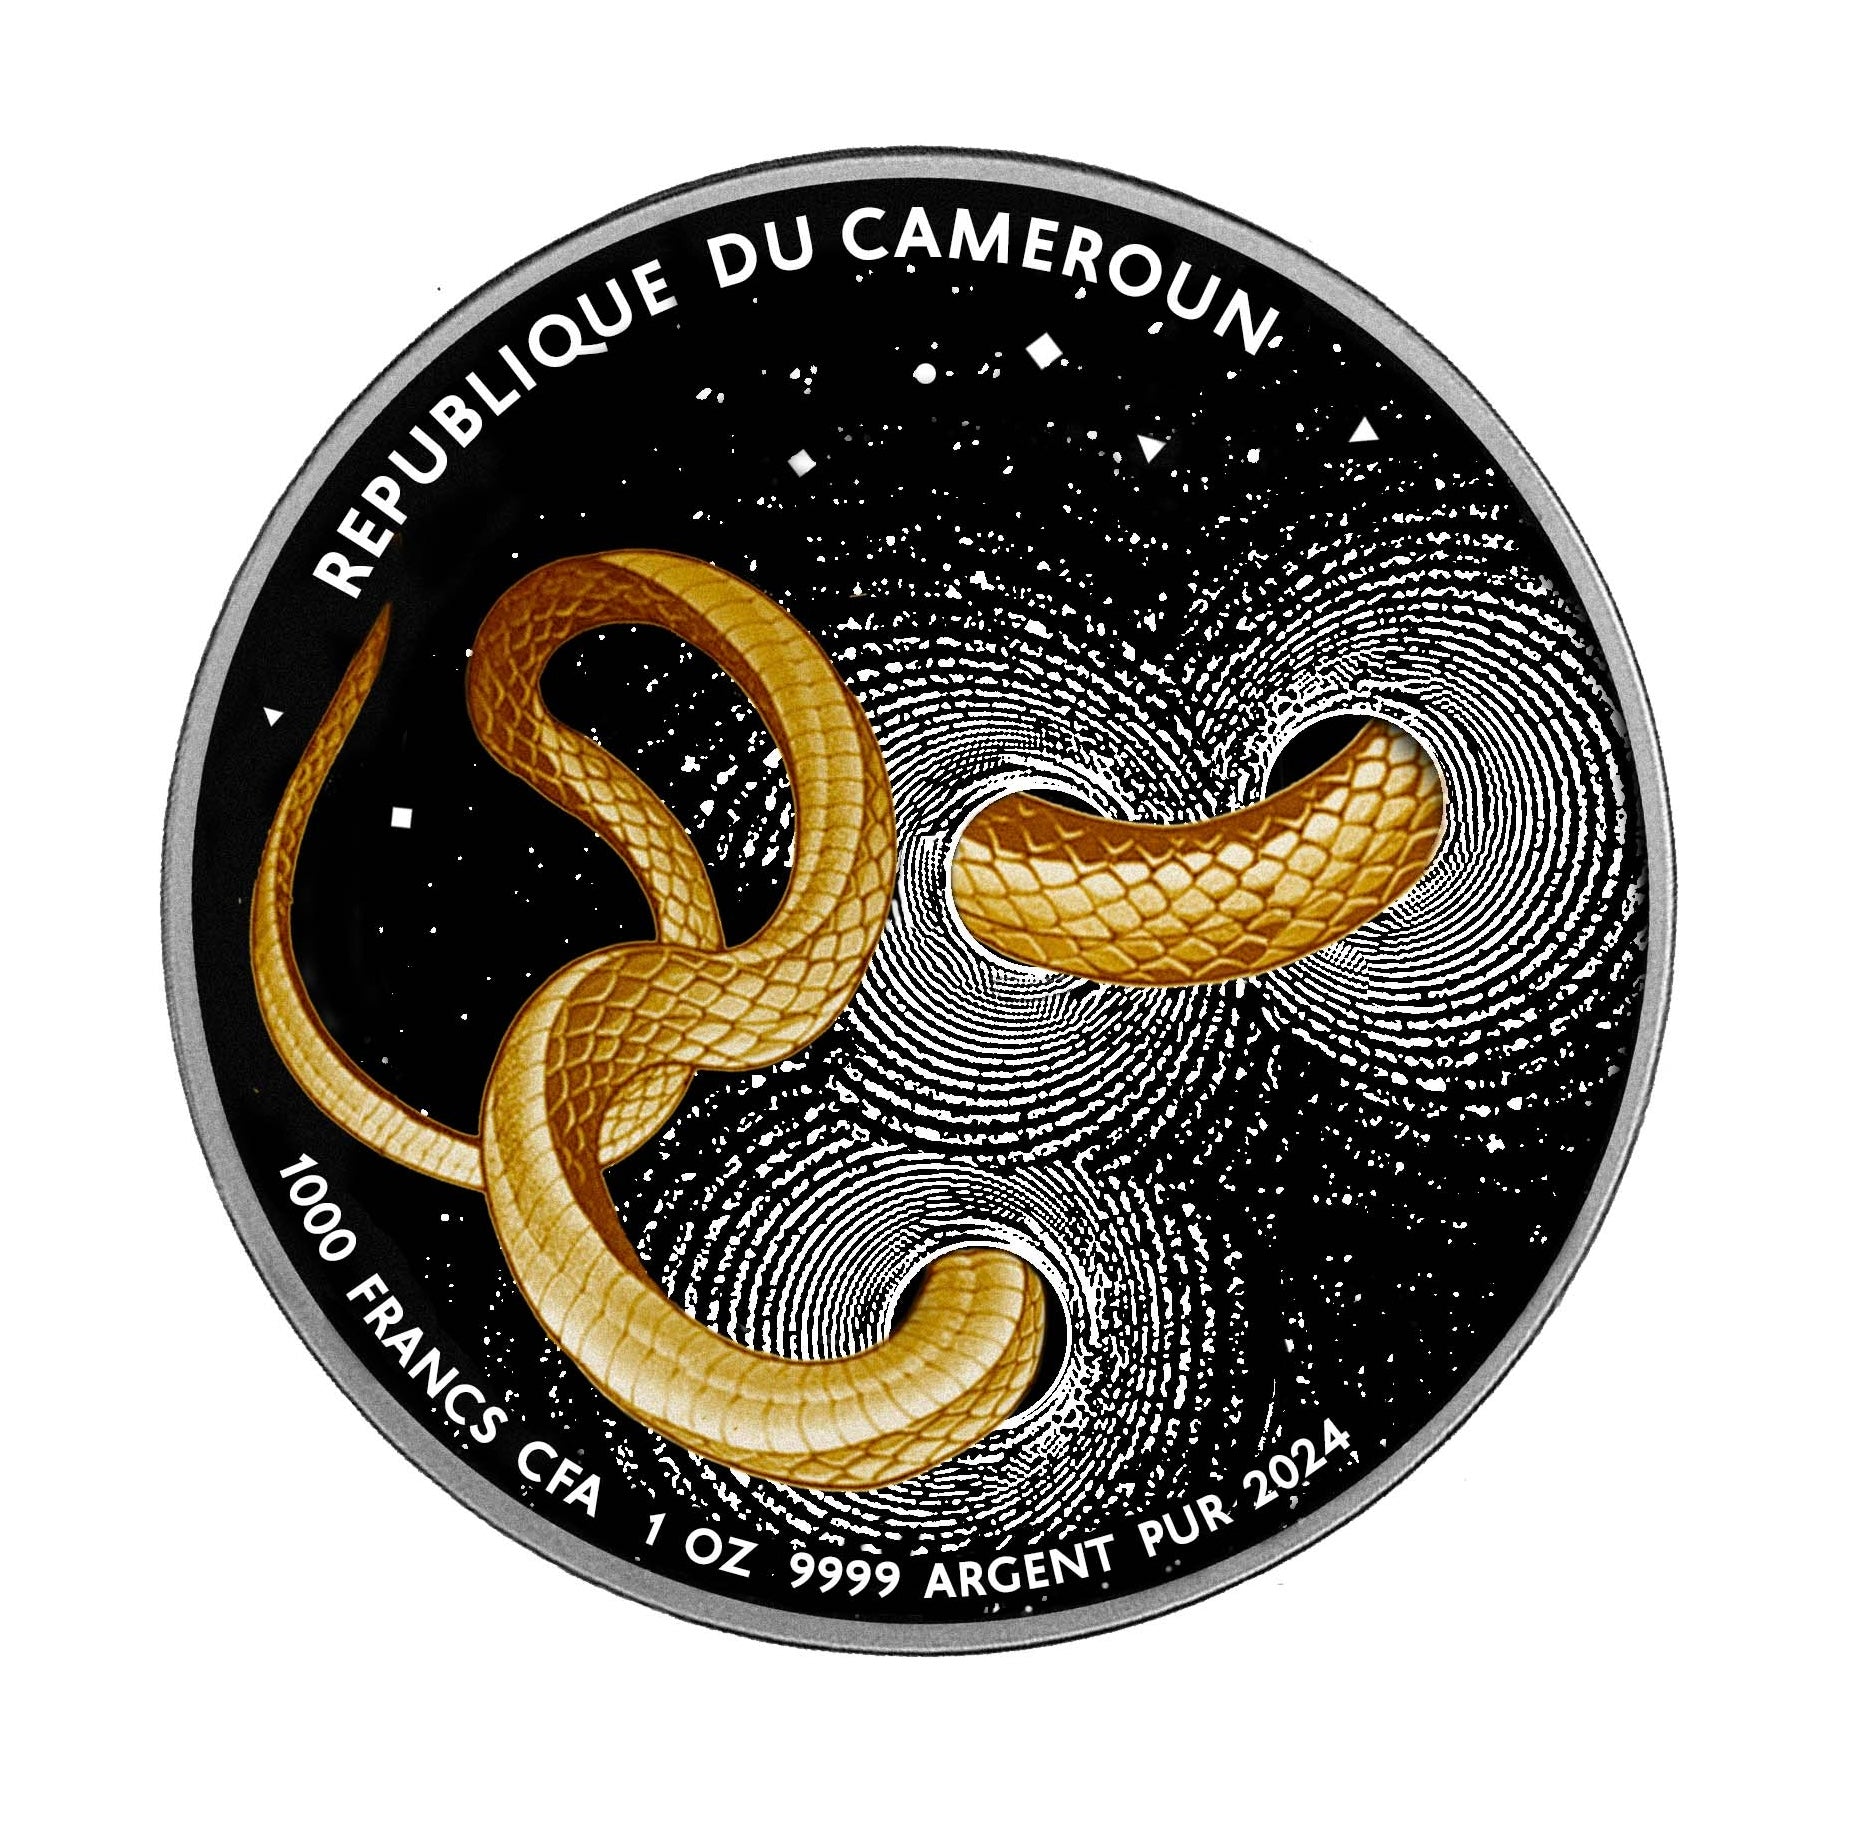 Snake Cameroon Coin 1 oz Silver Le Grand Mint